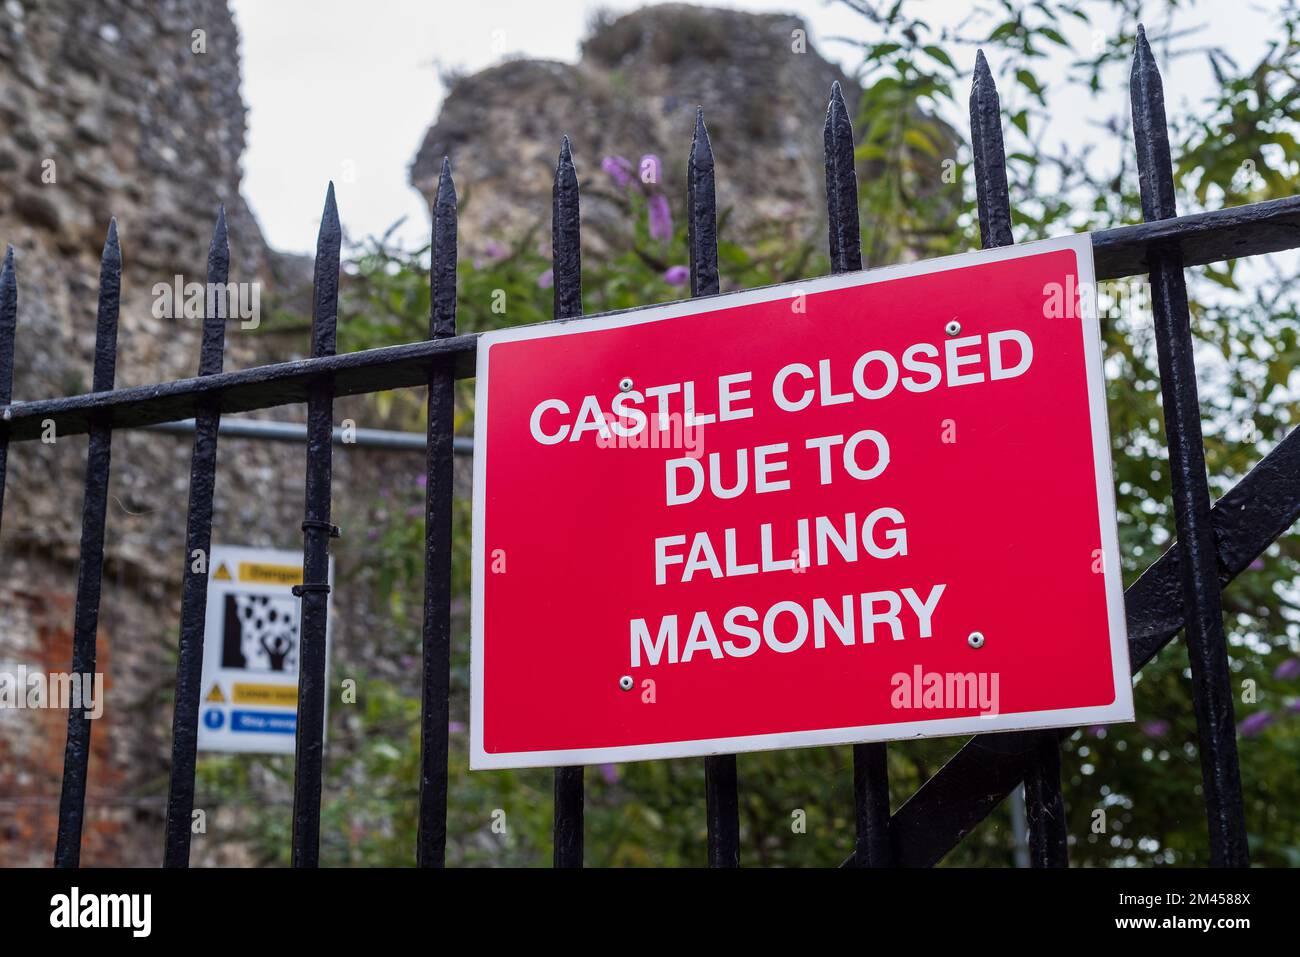 Gate closed, falling masonry warning sign on gate at Canterbury Castle ruin site in Kent, England. Stock Photo